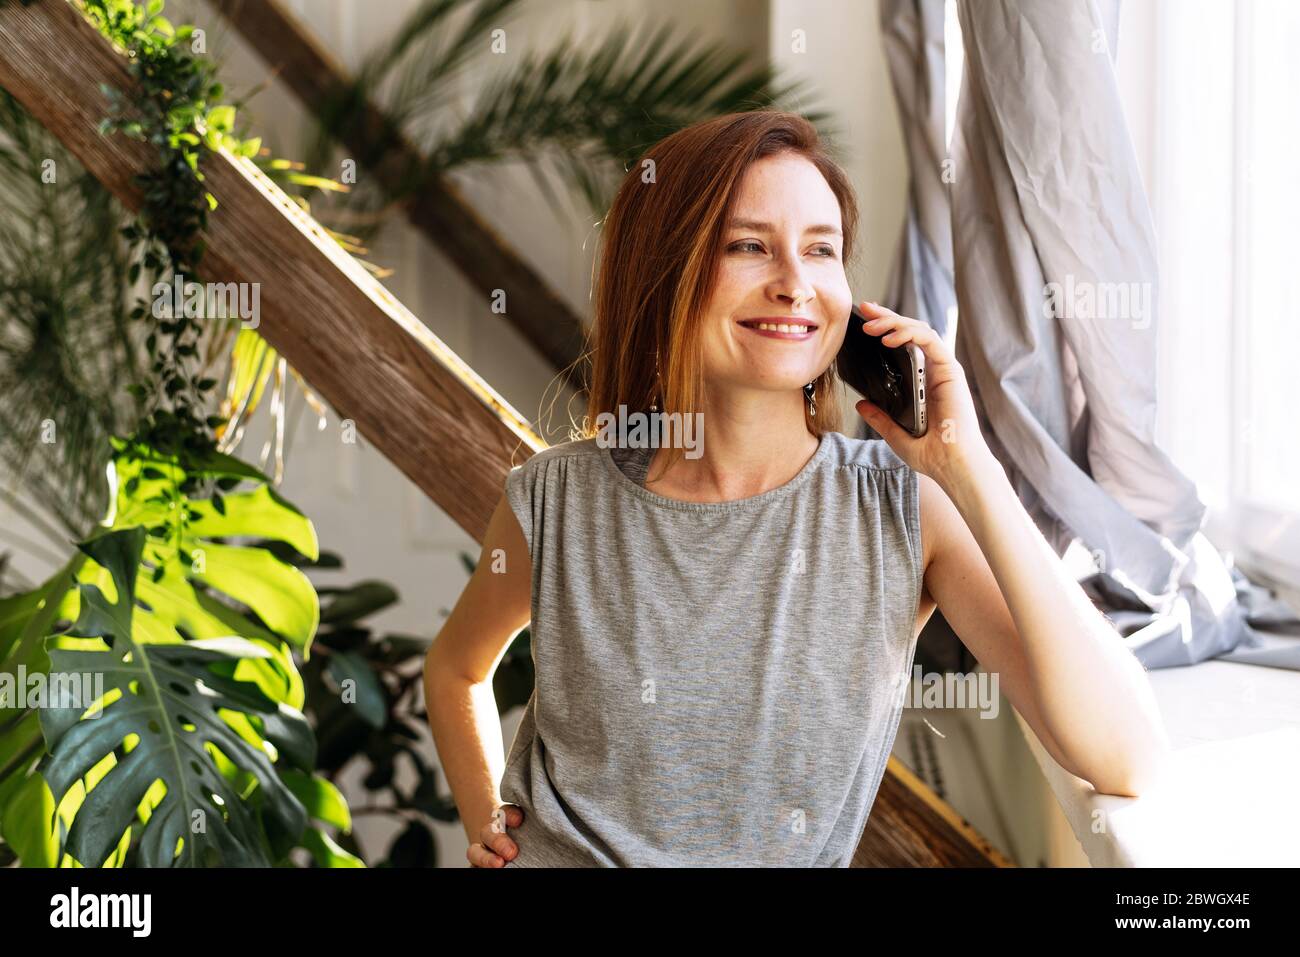 A pretty woman speaks at home on the phone with relatives or friends on a background of diverse plants. Stock Photo